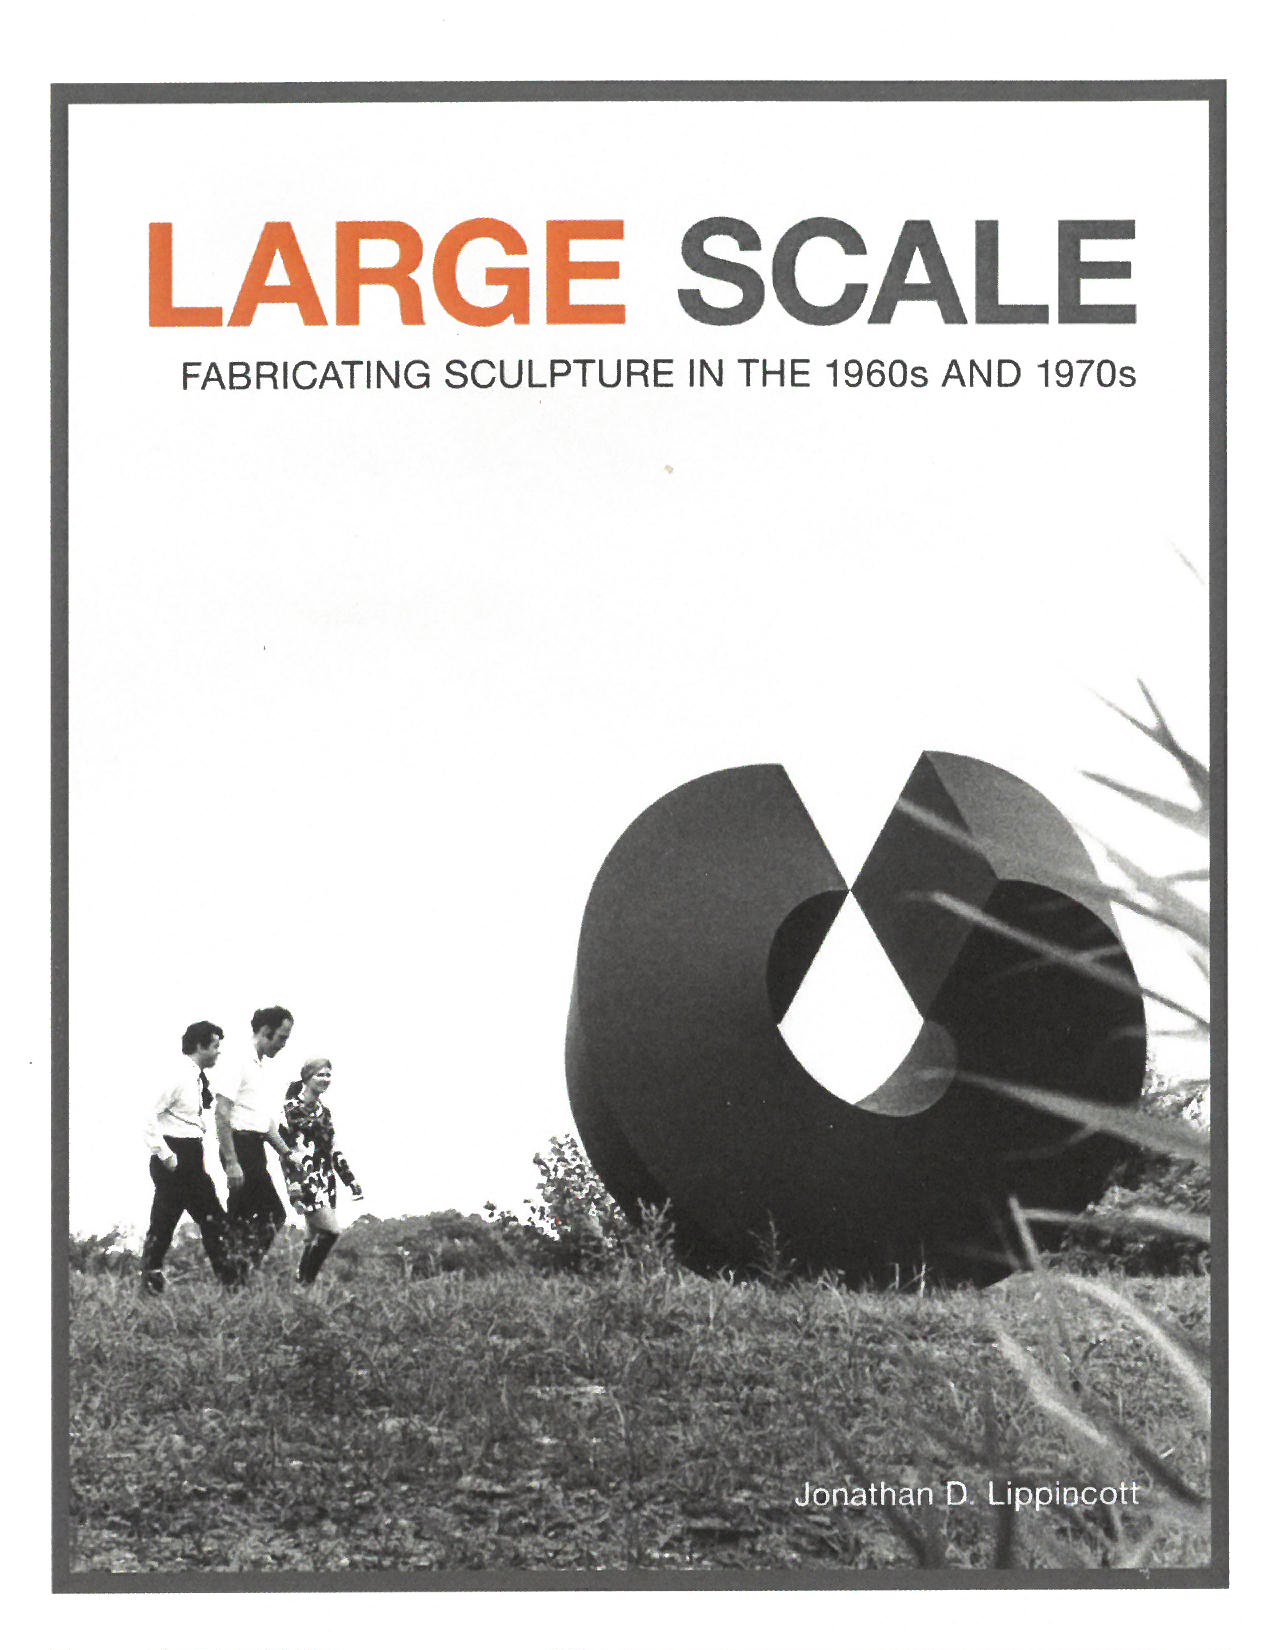 LARGE SCALEFabricating Sculpture in the 1960s and 1970sJONATHAN D. LIPPINCOTT (copy)